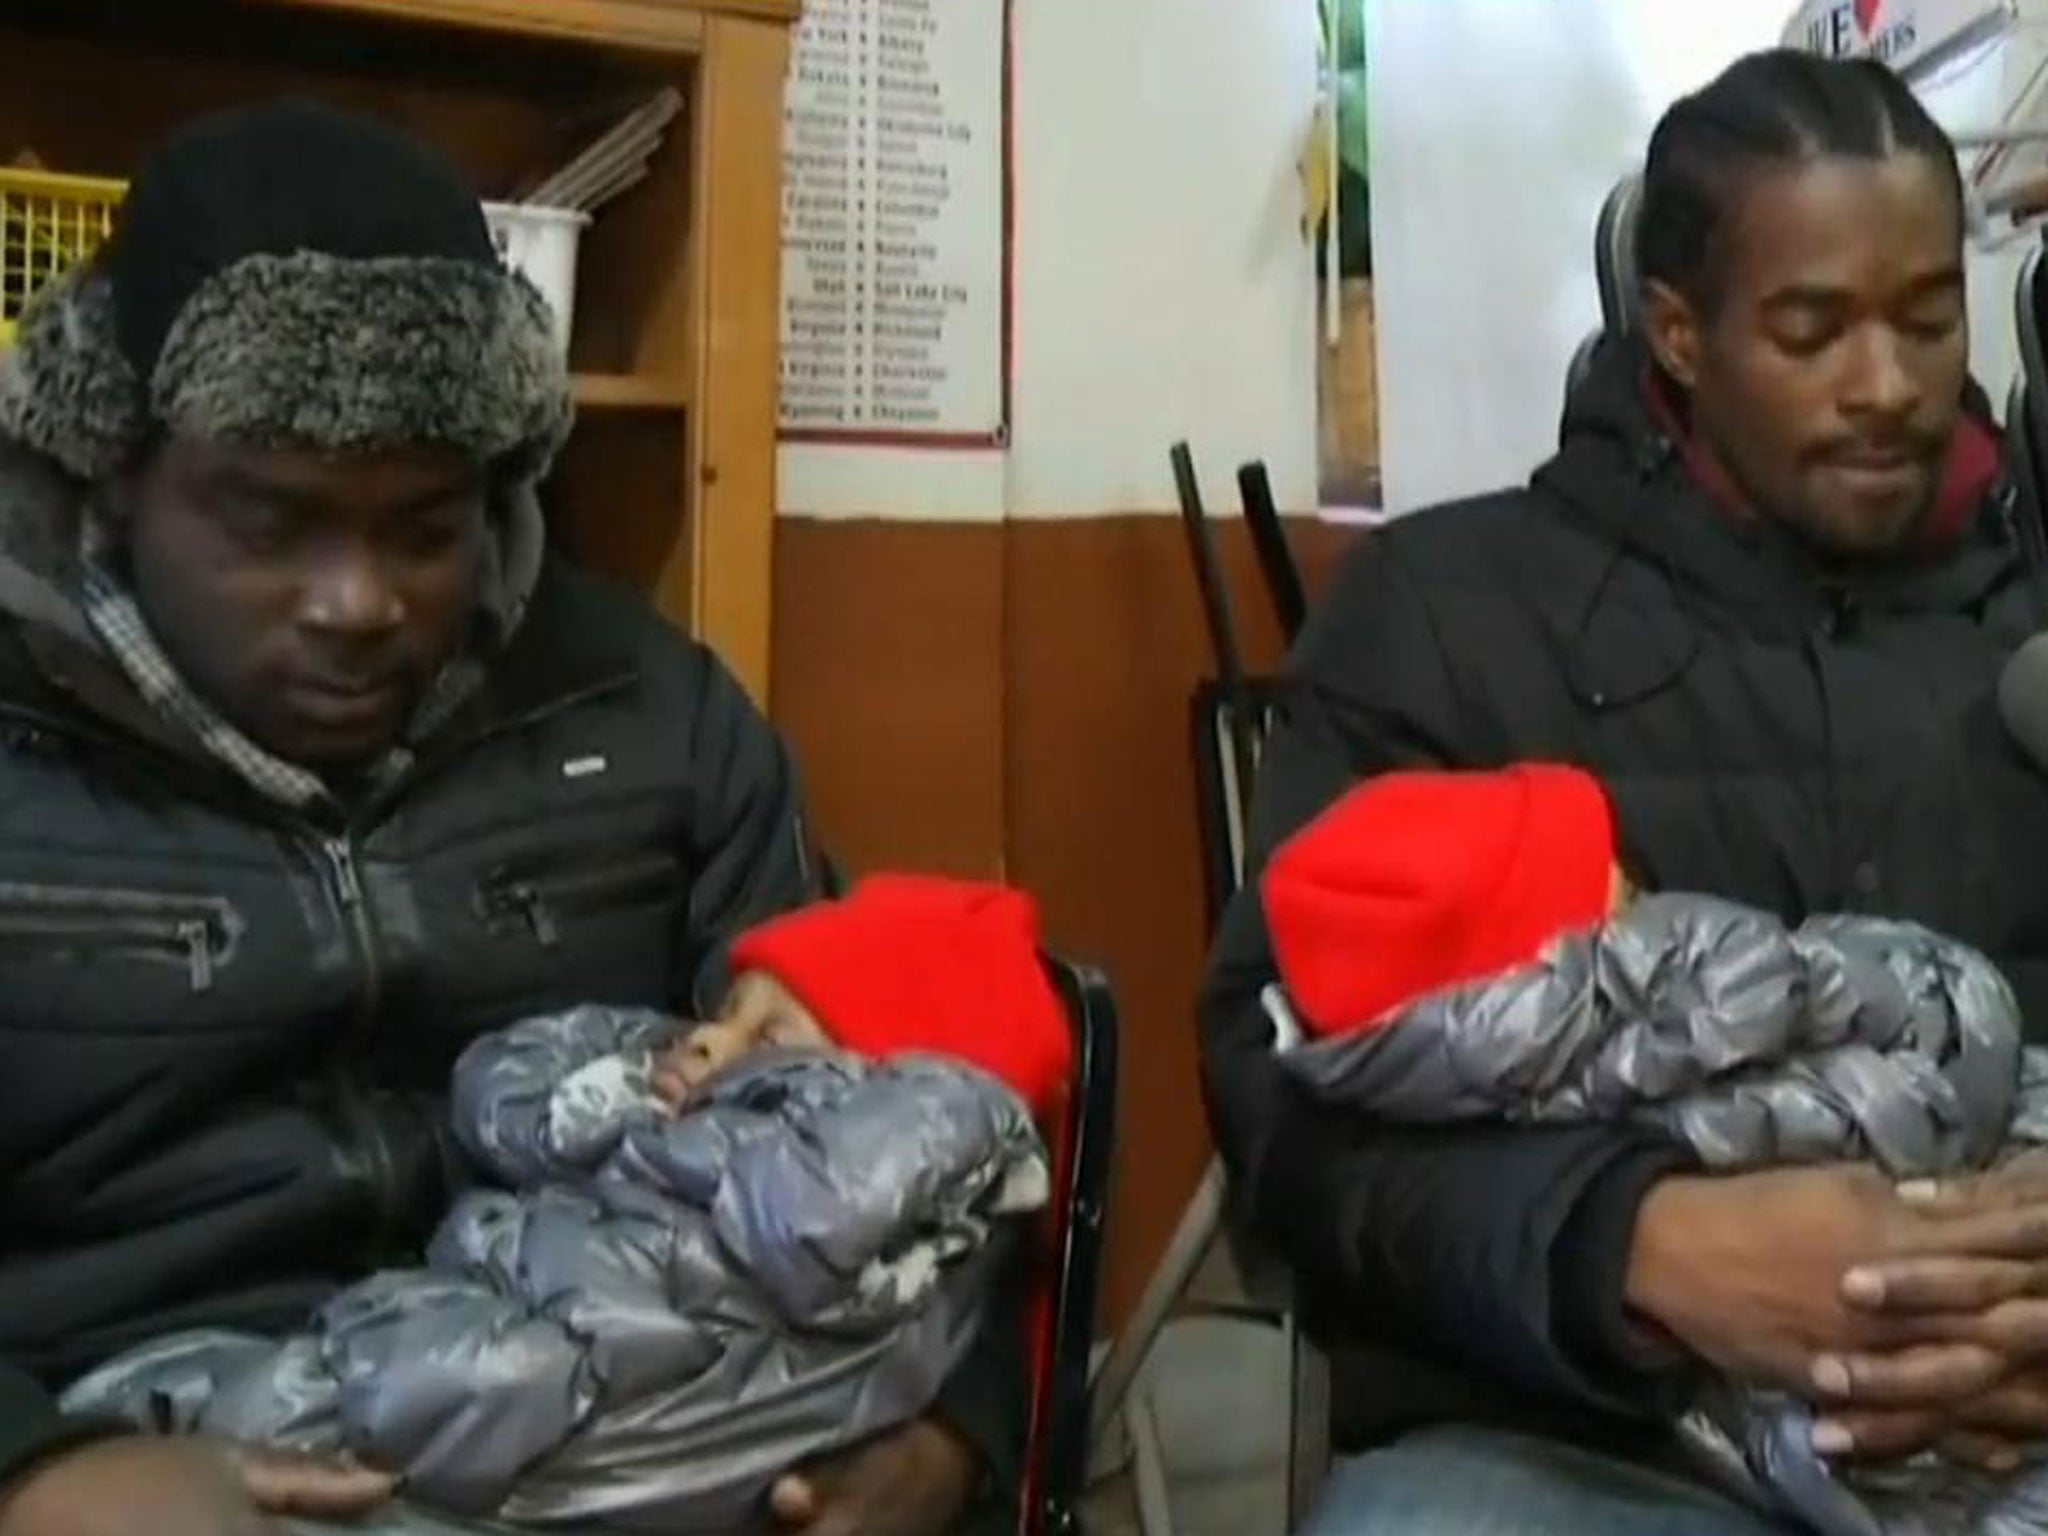 Jermaine Shirley, left, saved the life of two twins by catching them as they were thrown down a fire escape